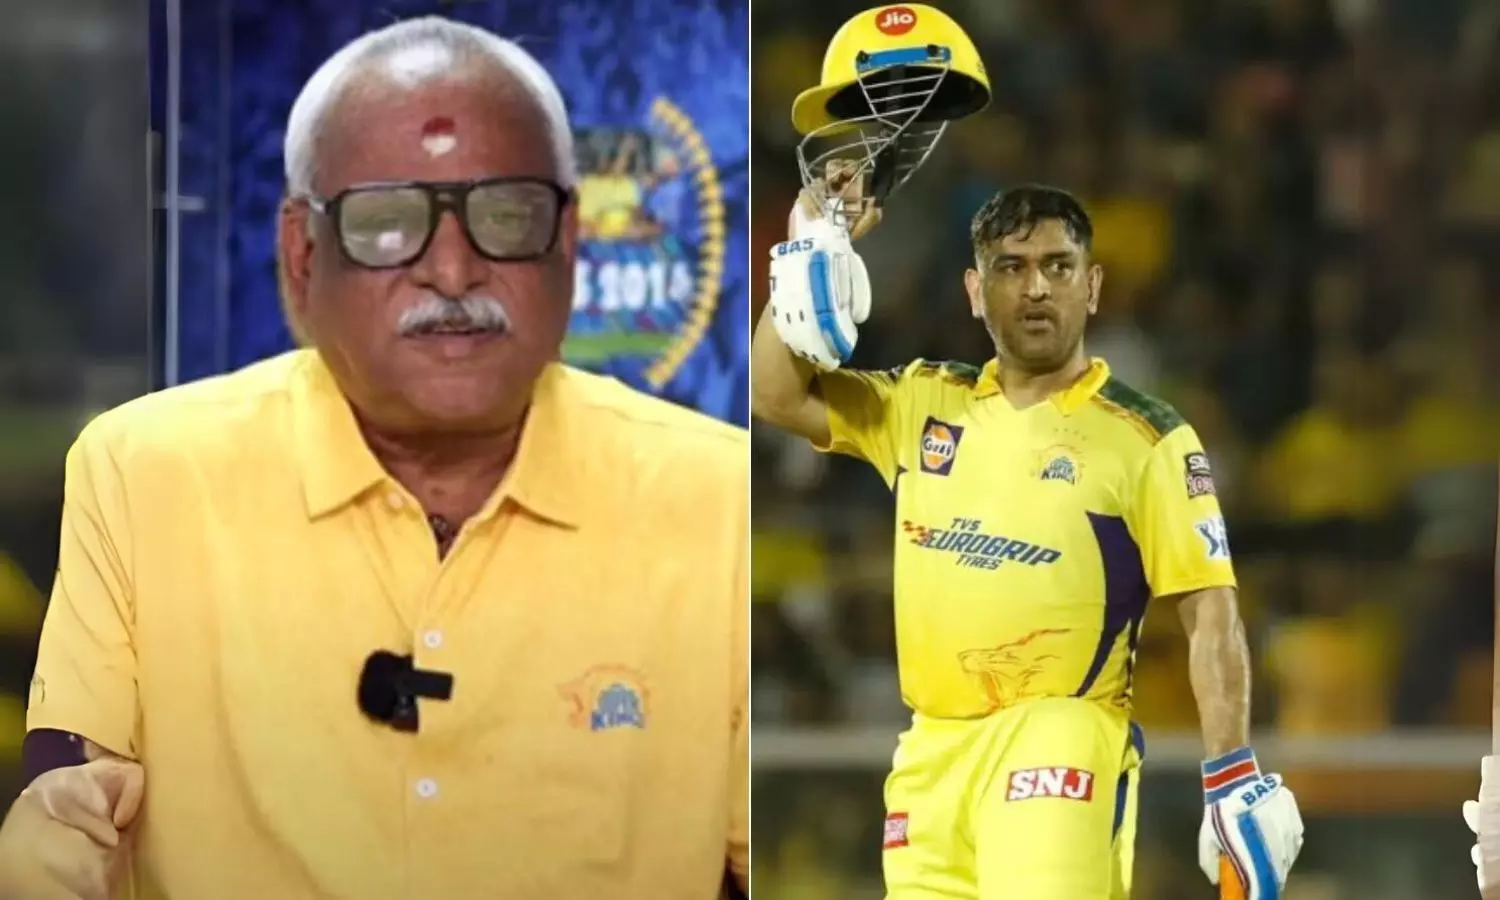 “We are very hopeful he’ll be available for CSK next year,” says CSK CEO Kasi Viswanathan on MS Dhoni